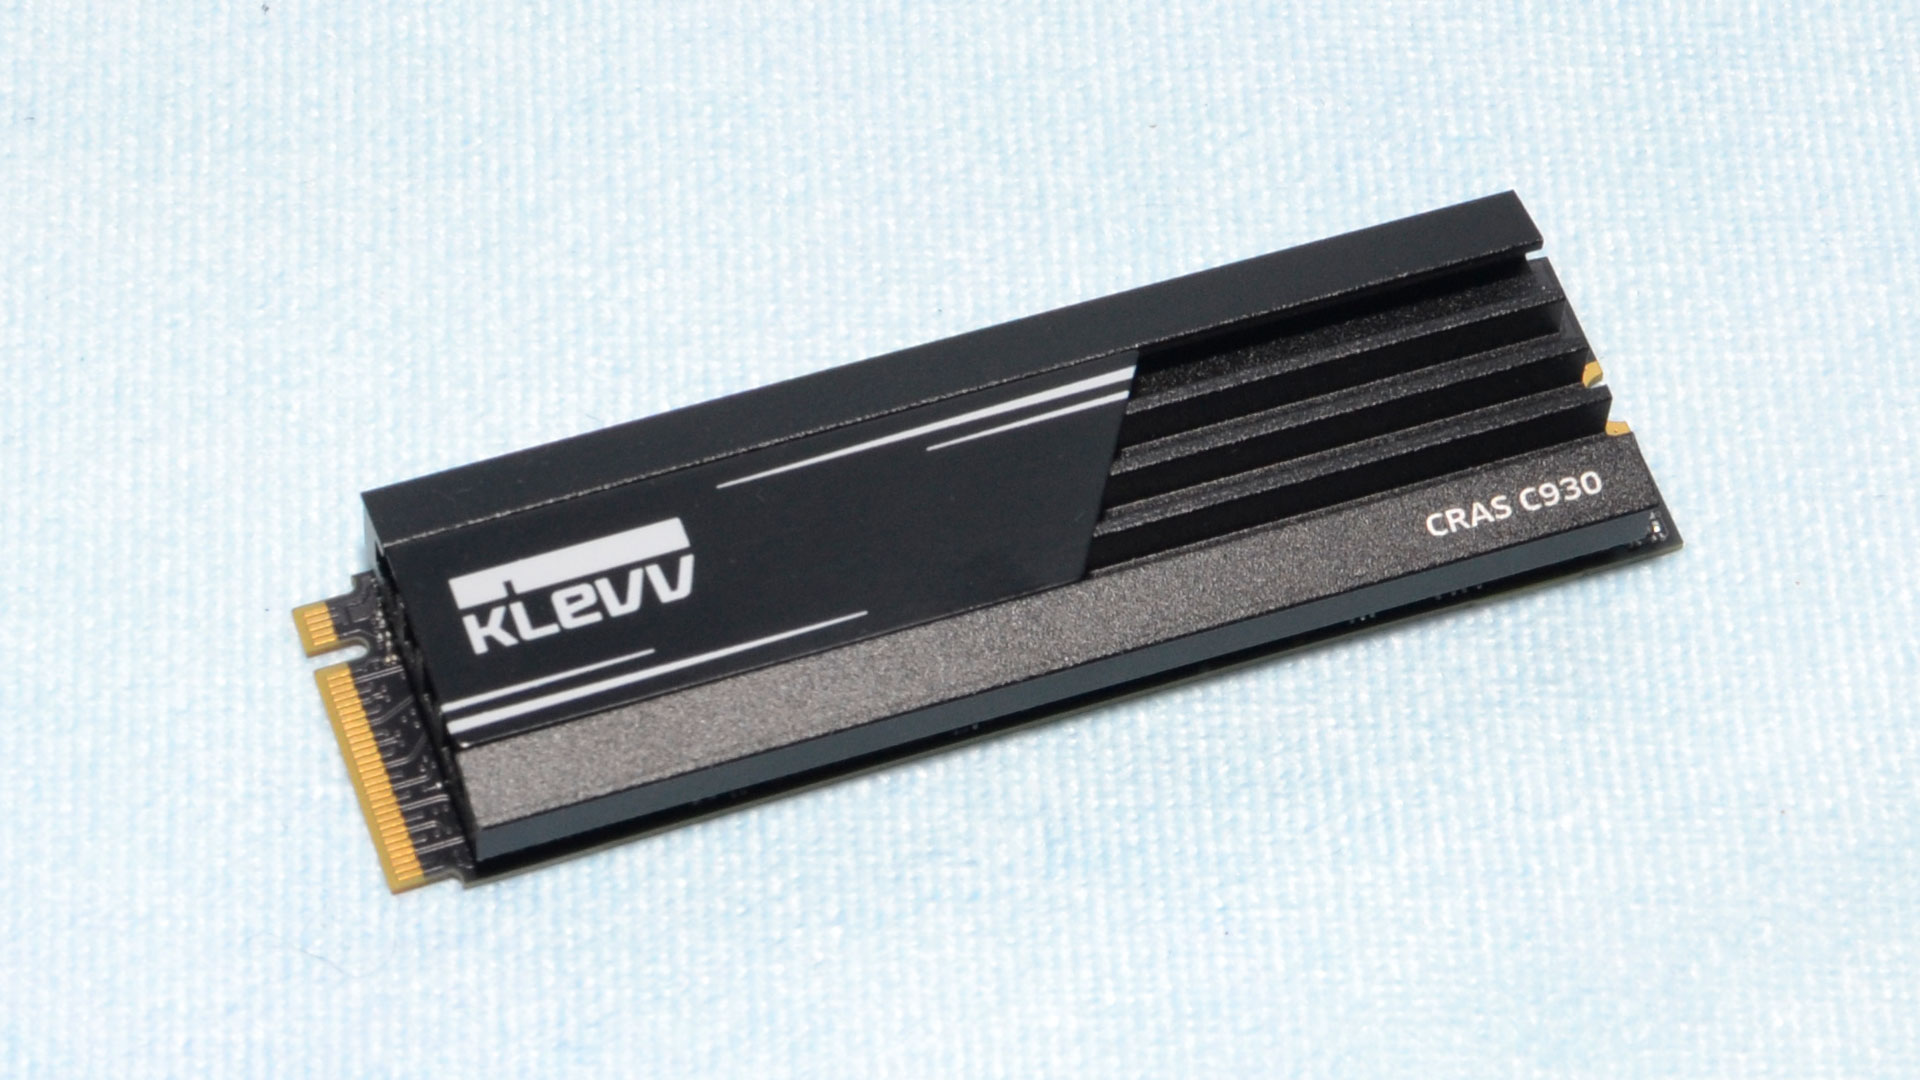 Klevv CRAS C930 2TB SSD review: The good, the bad, and the mediocre